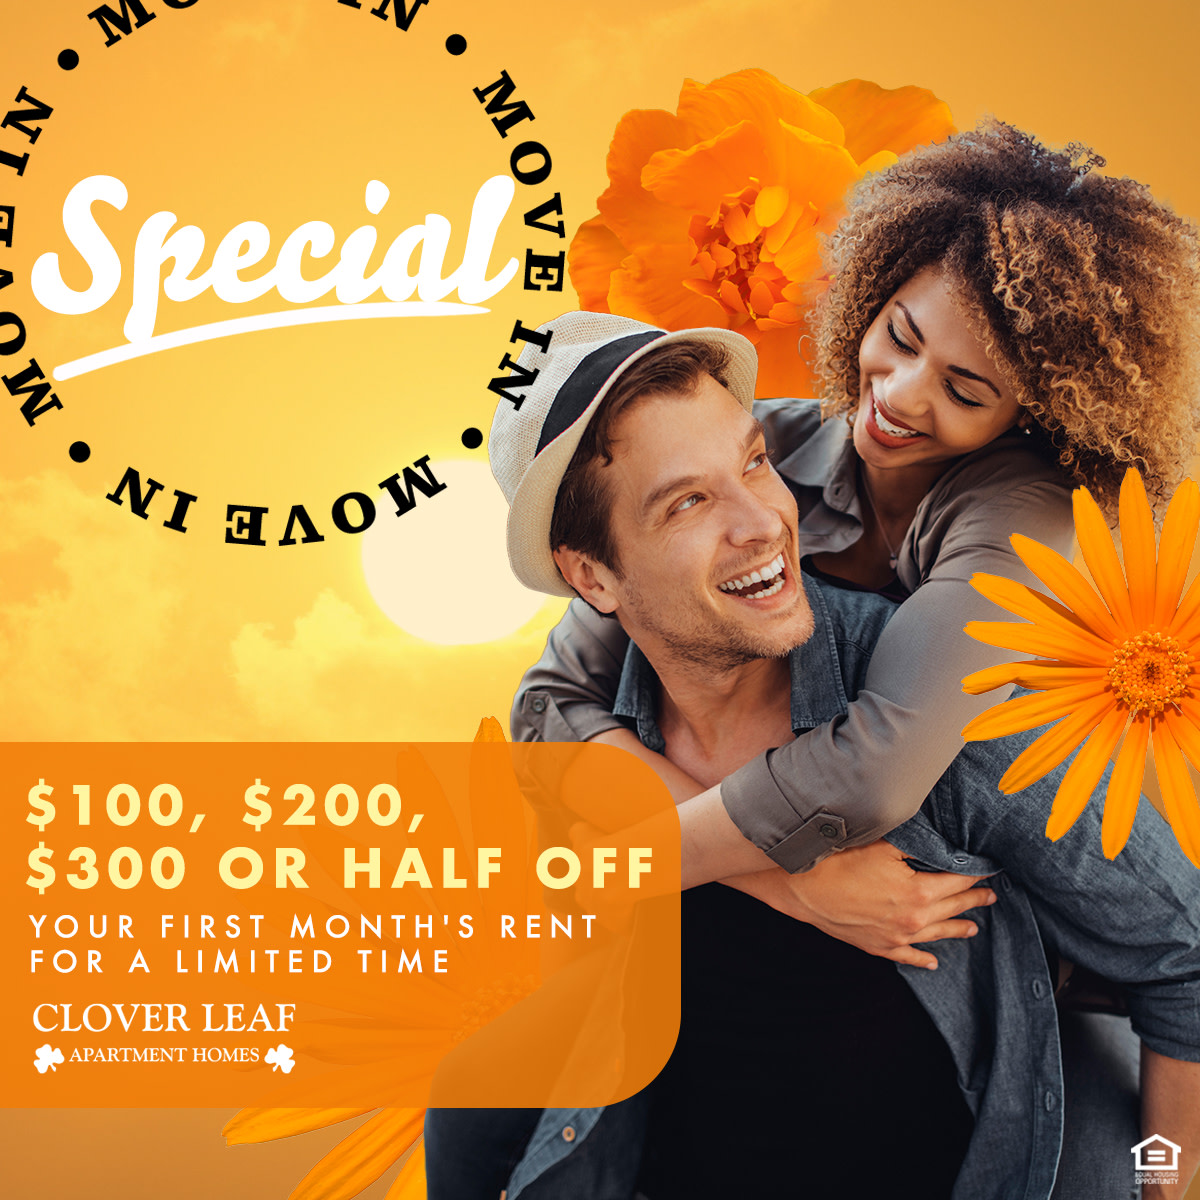 🙌 It’s time to get moving to #CloverLeaf #Apartment Homes in #PhenixCityAL while these move-in specials shake things up! Save from the start w/ $100, $200, $300 or half-off your first full month’s rent w/ approval. Try your luck with us! Apply now. cloverleafal.com 💵🍀